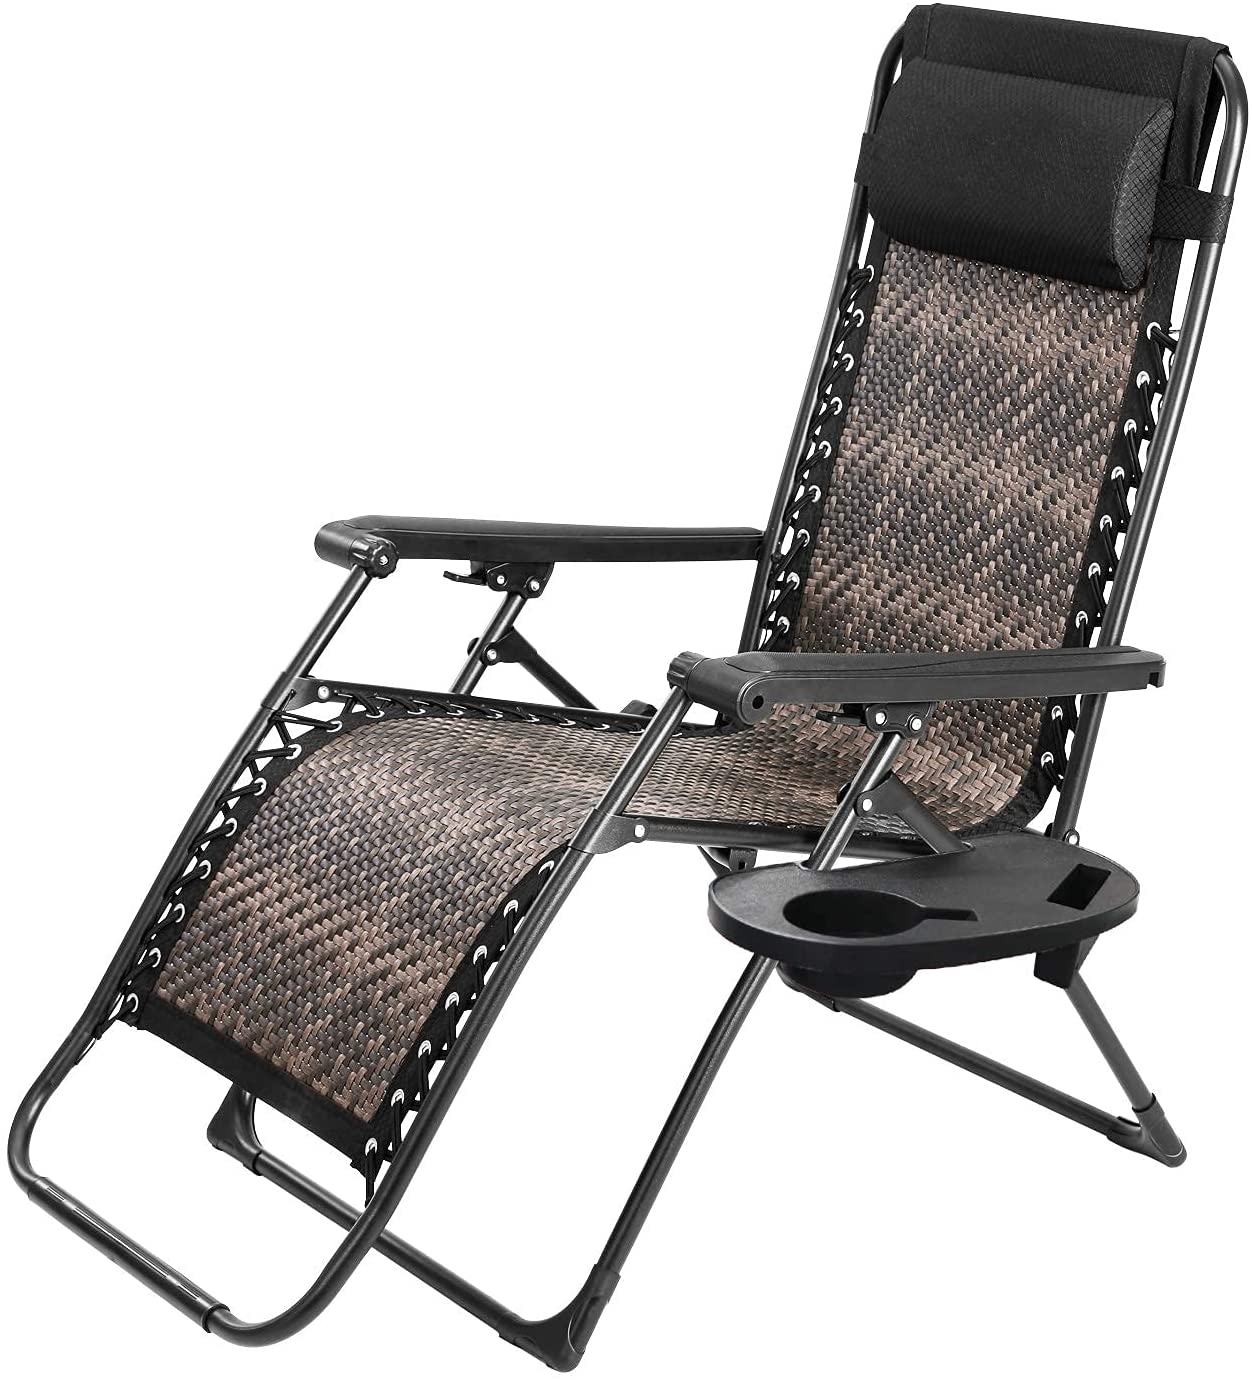 SOLAURA Zero Gravity Chair Outdoor Patio Adjustable Folding Wicker Recliner Lounge Chair - image 1 of 7